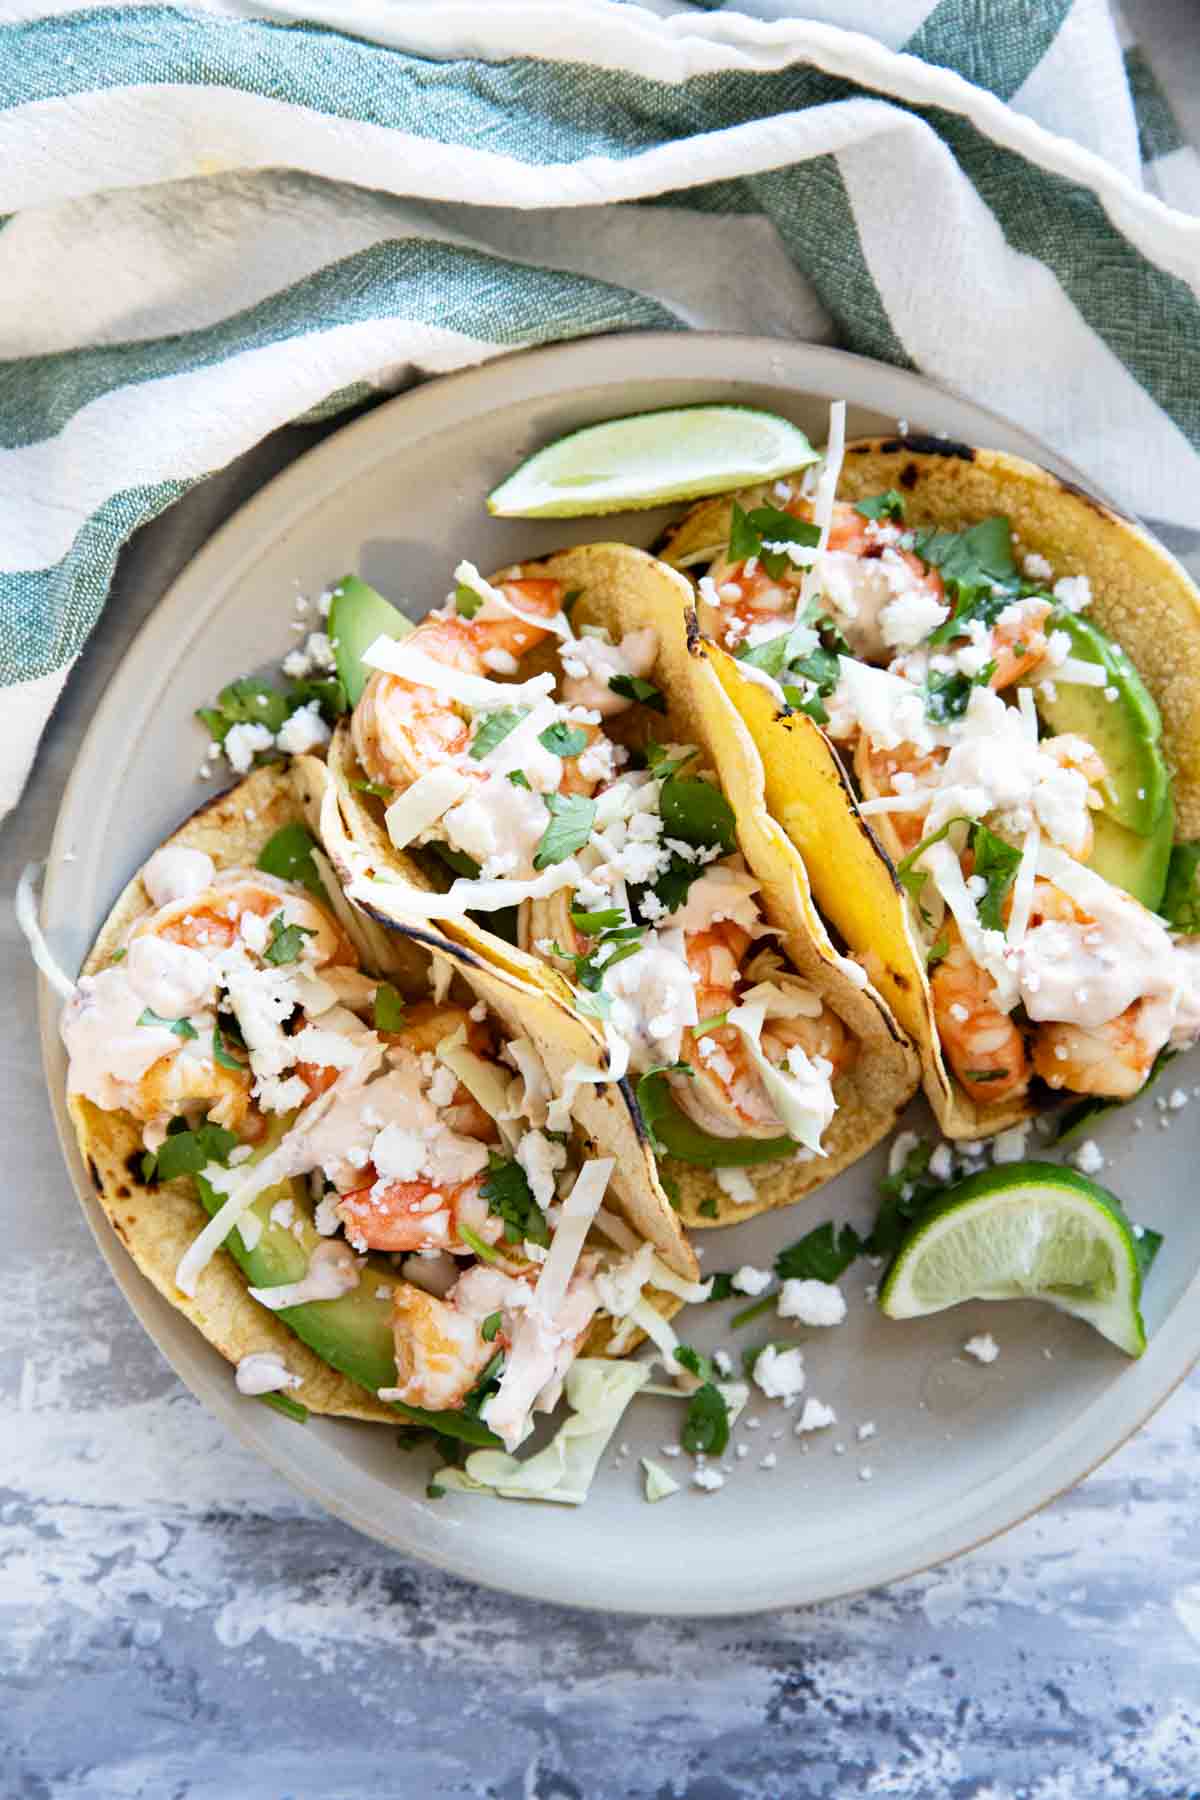 Three shrimp tacos on a plate, topped with cabbage, cheese, and chipotle lime crema.